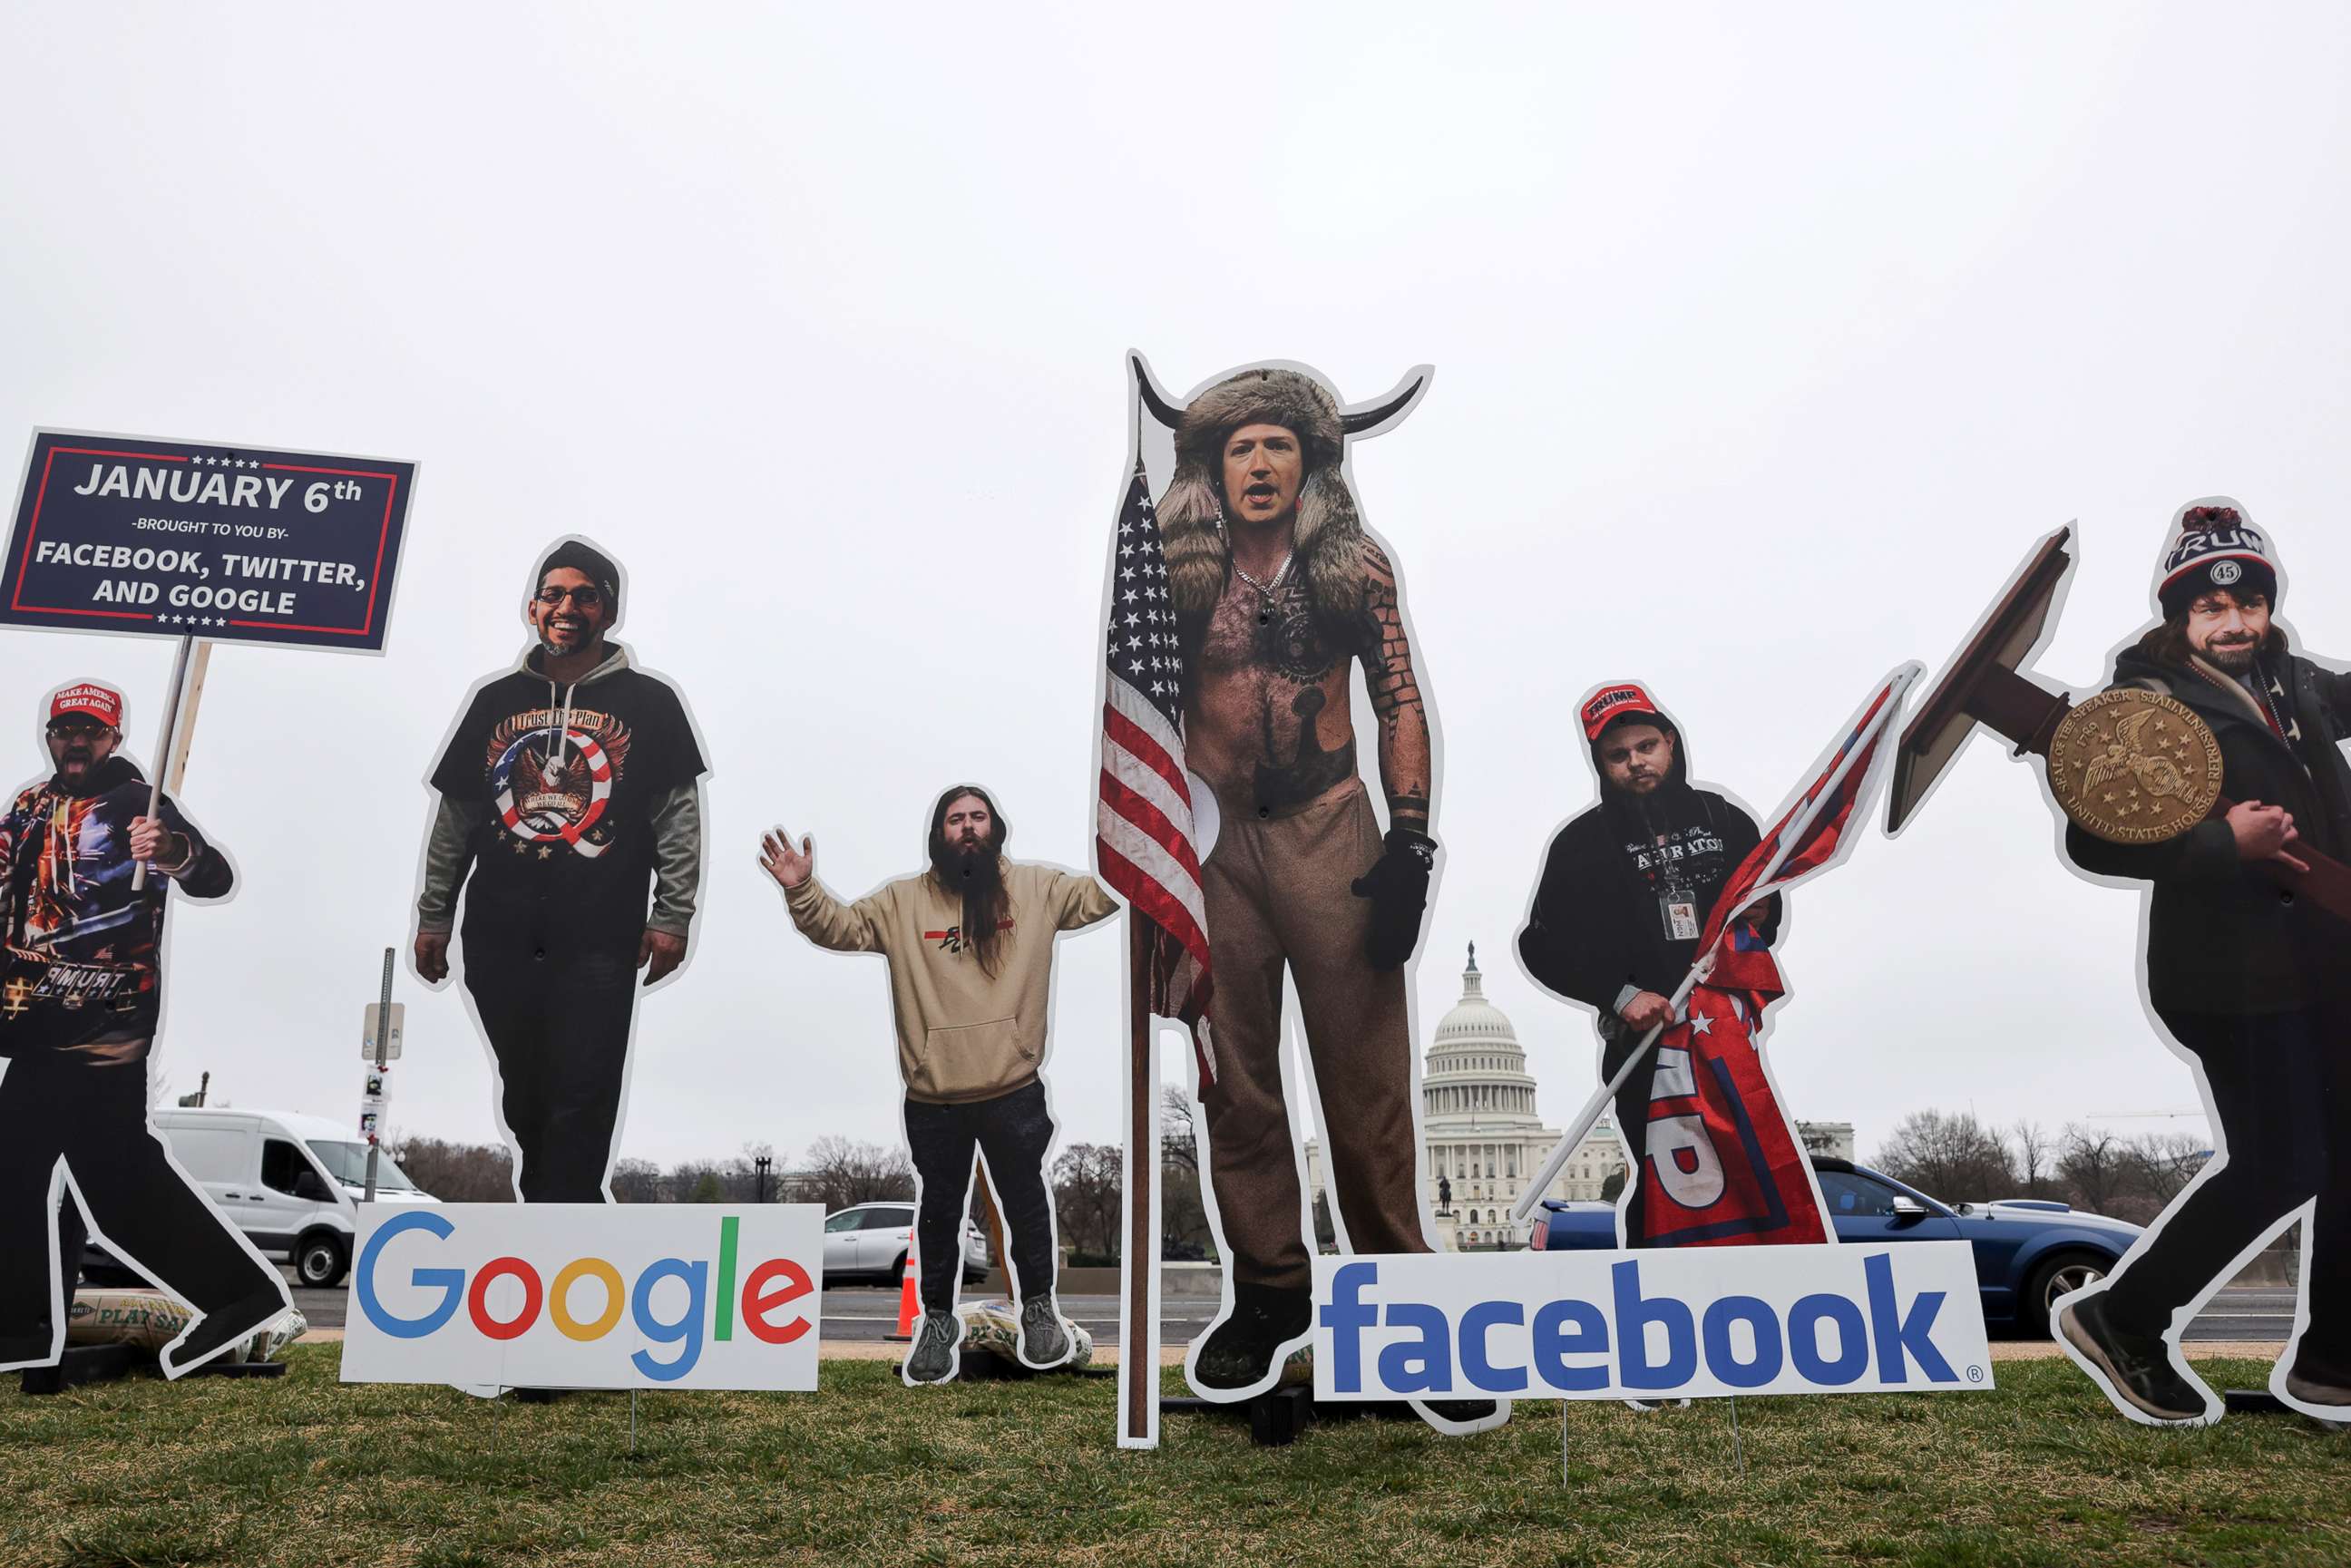 PHOTO: An art installation protest portrays Google CEO Sundar Pichai, Twitter CEO Jack Dorsey and Facebook CEO Mark Zuckerberg as January 6th rioters on the National Mall near the U.S. Capitol in Washington, D.C., March 25, 2021.